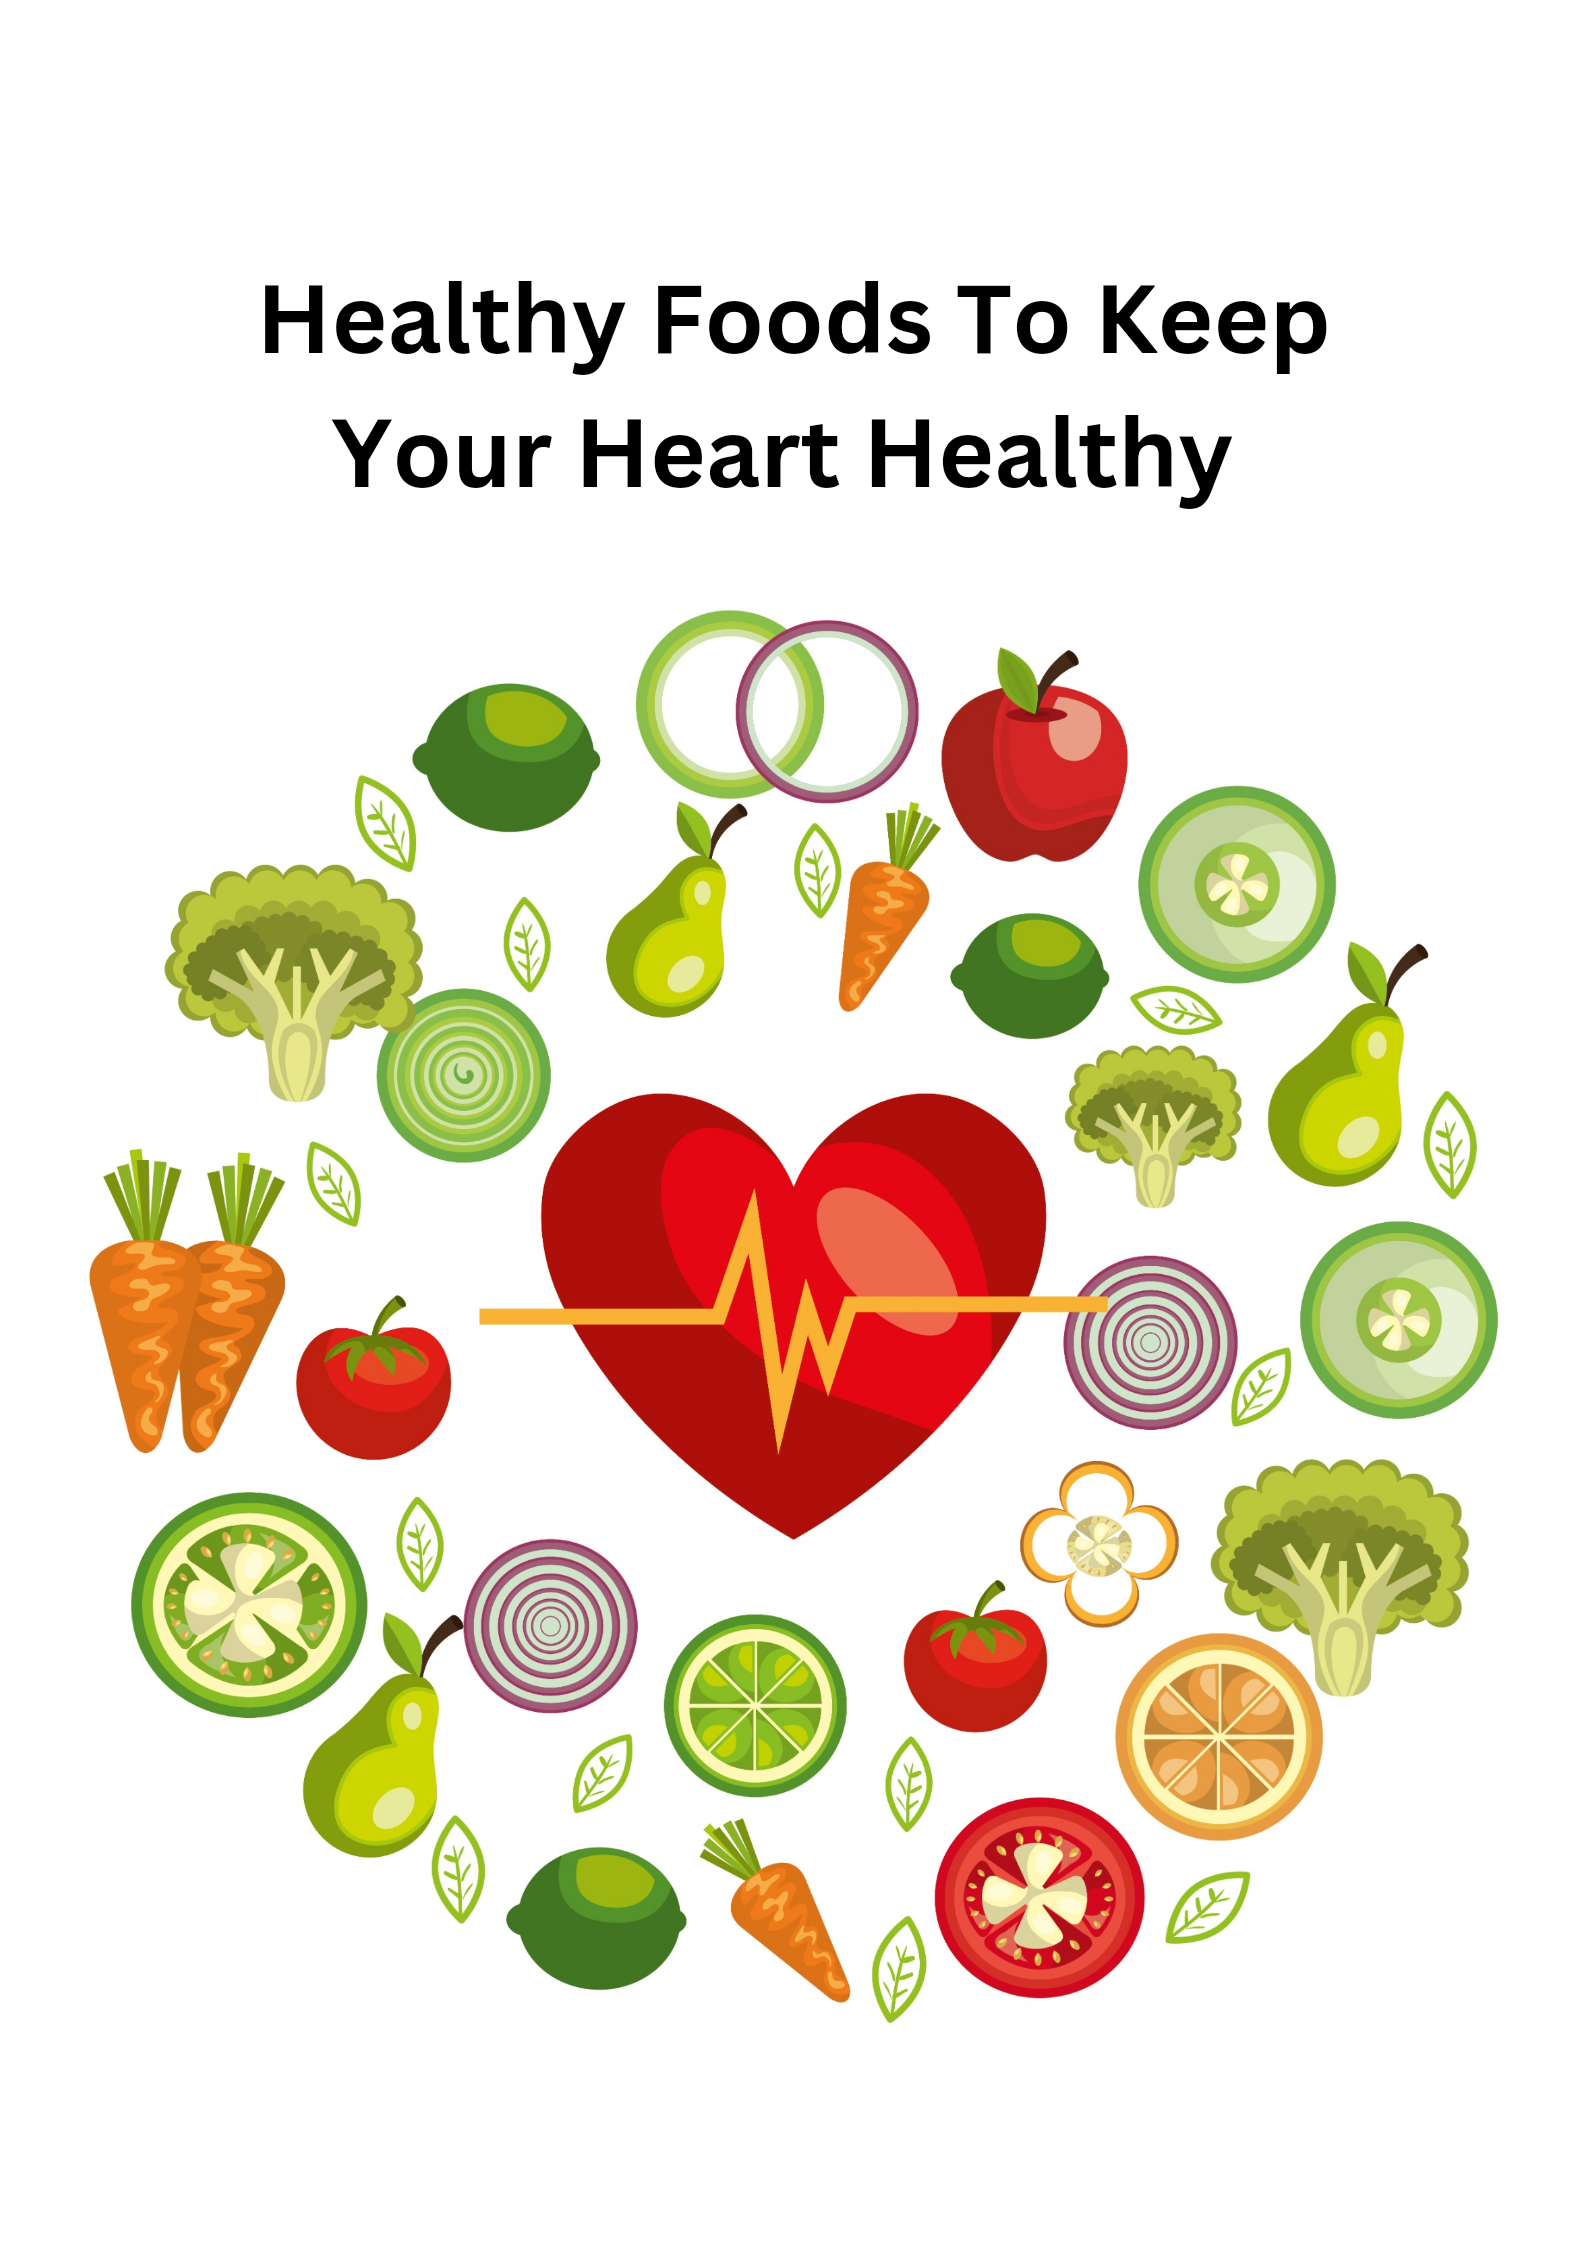 Healthy Food To Keep Your Heart Healthy